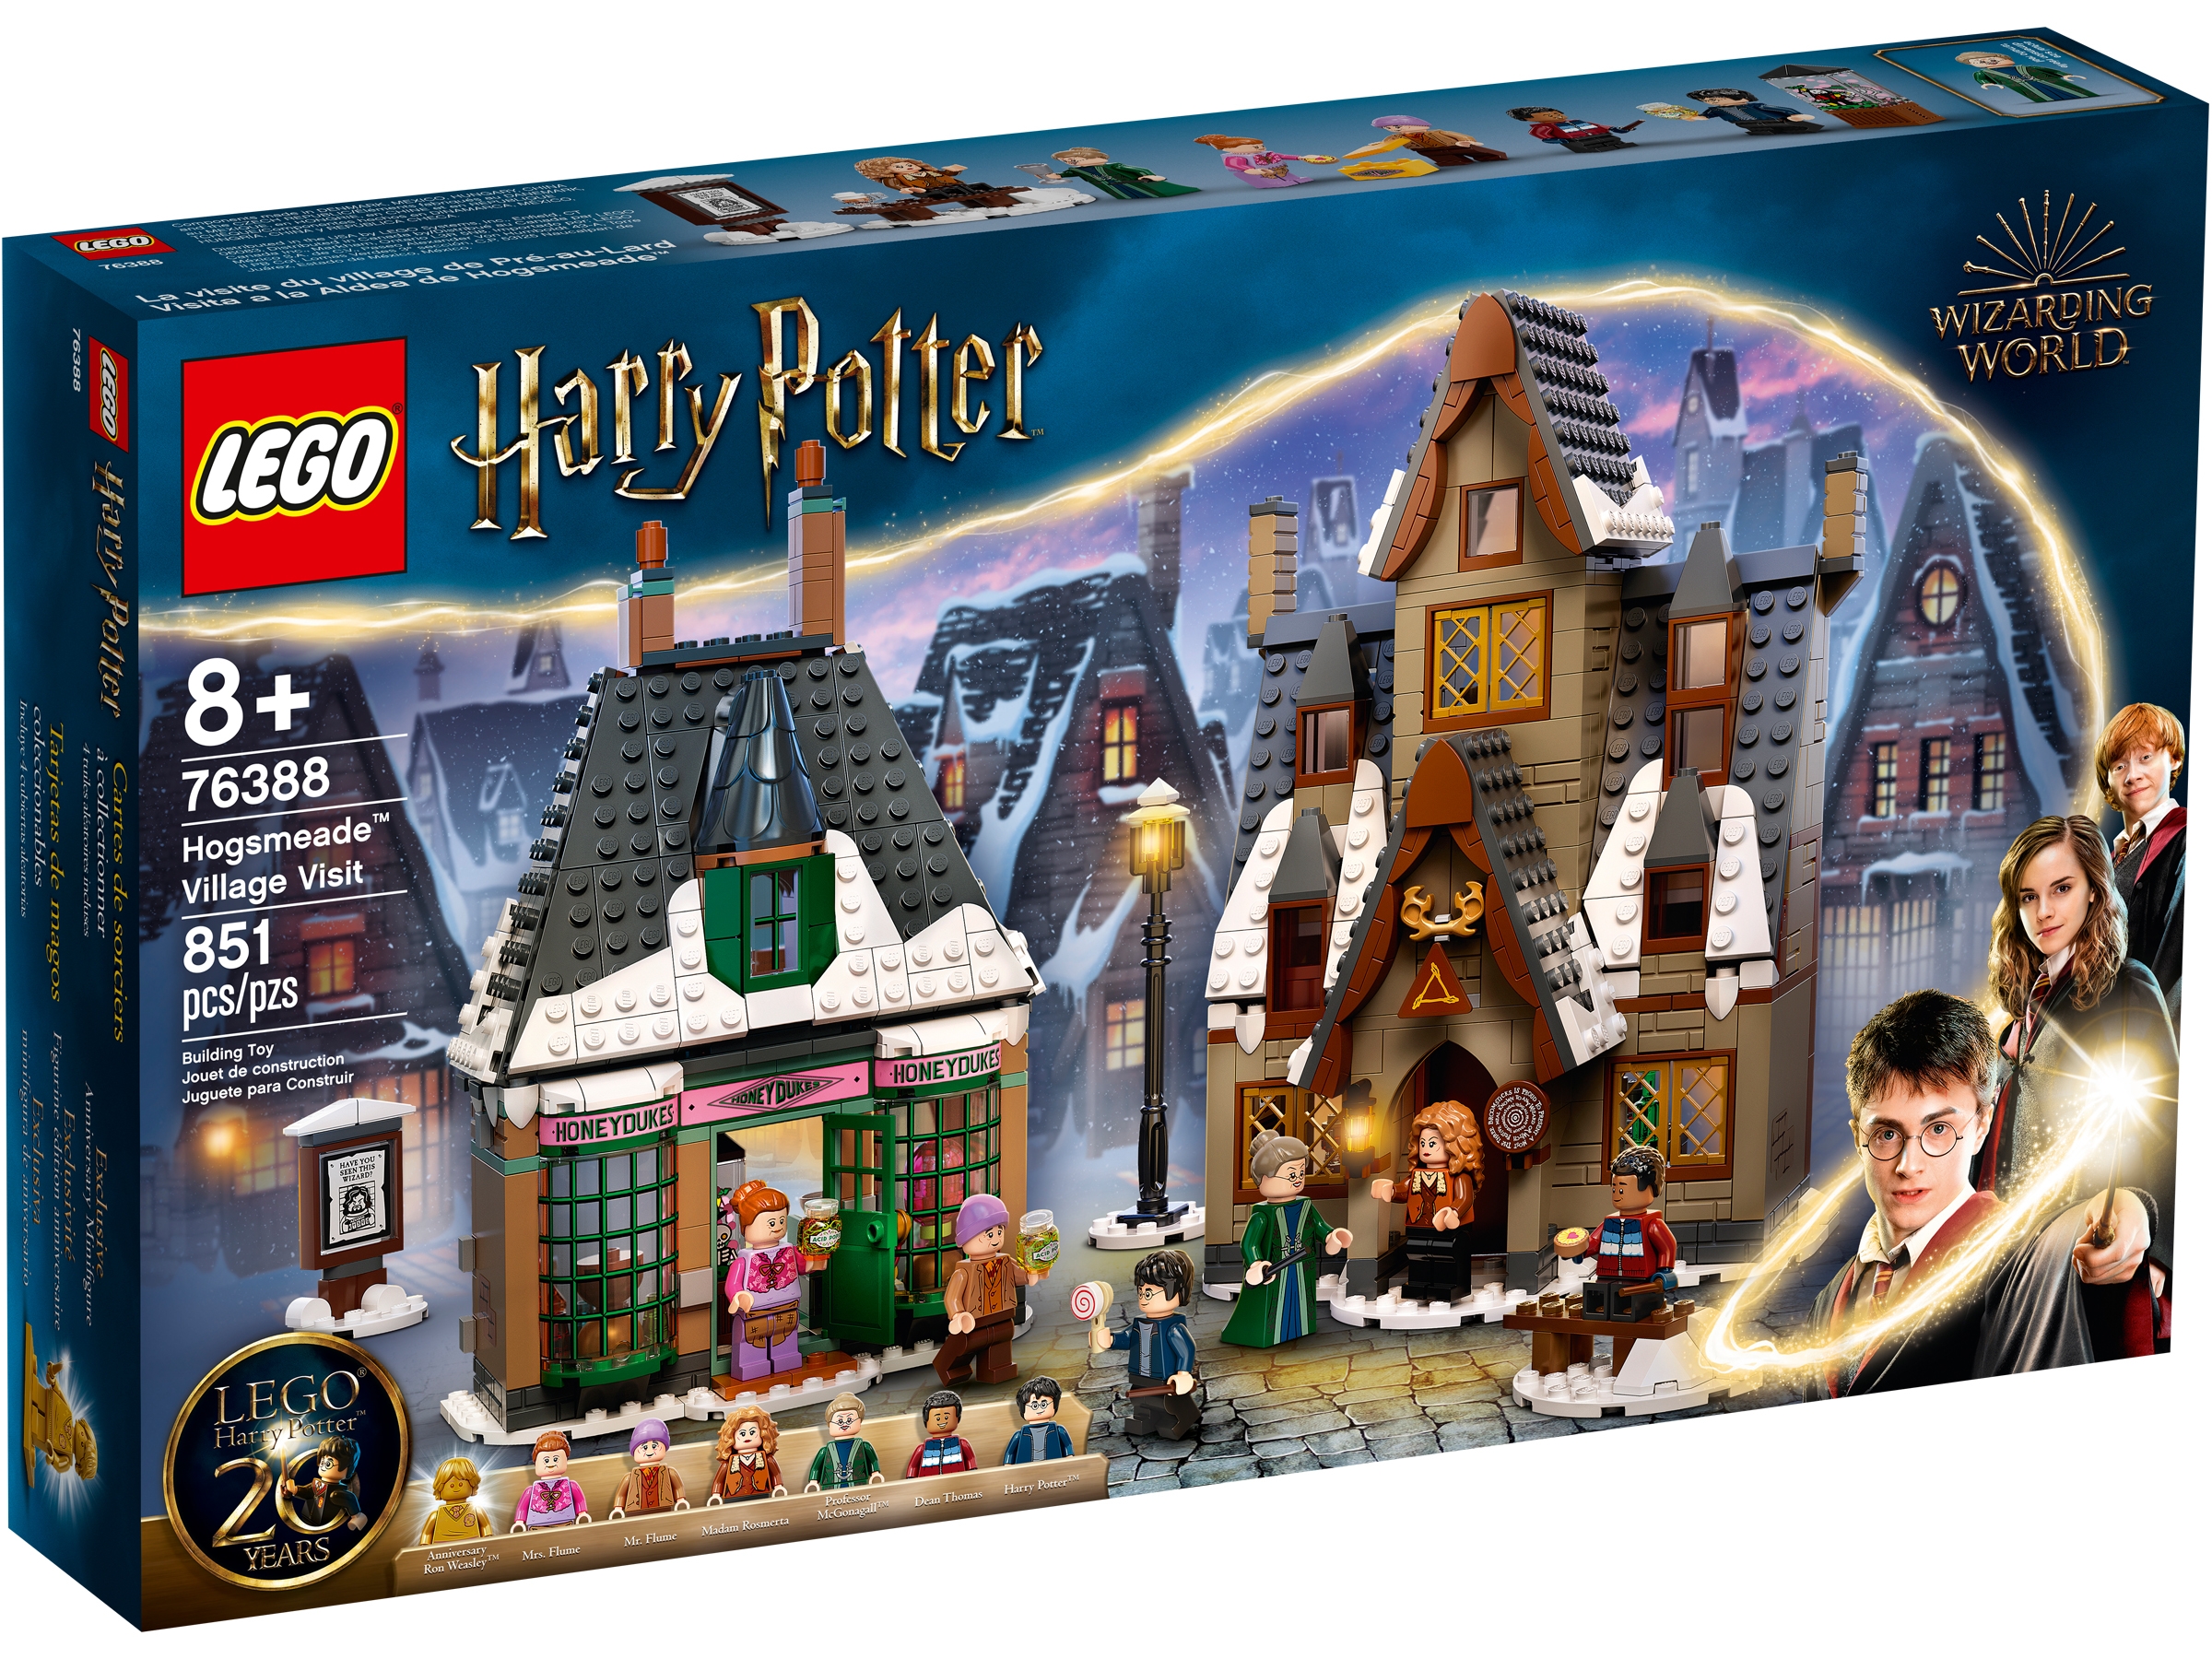 Harry Potter Legos: Review of the Weasley House Set - Nerds on Earth